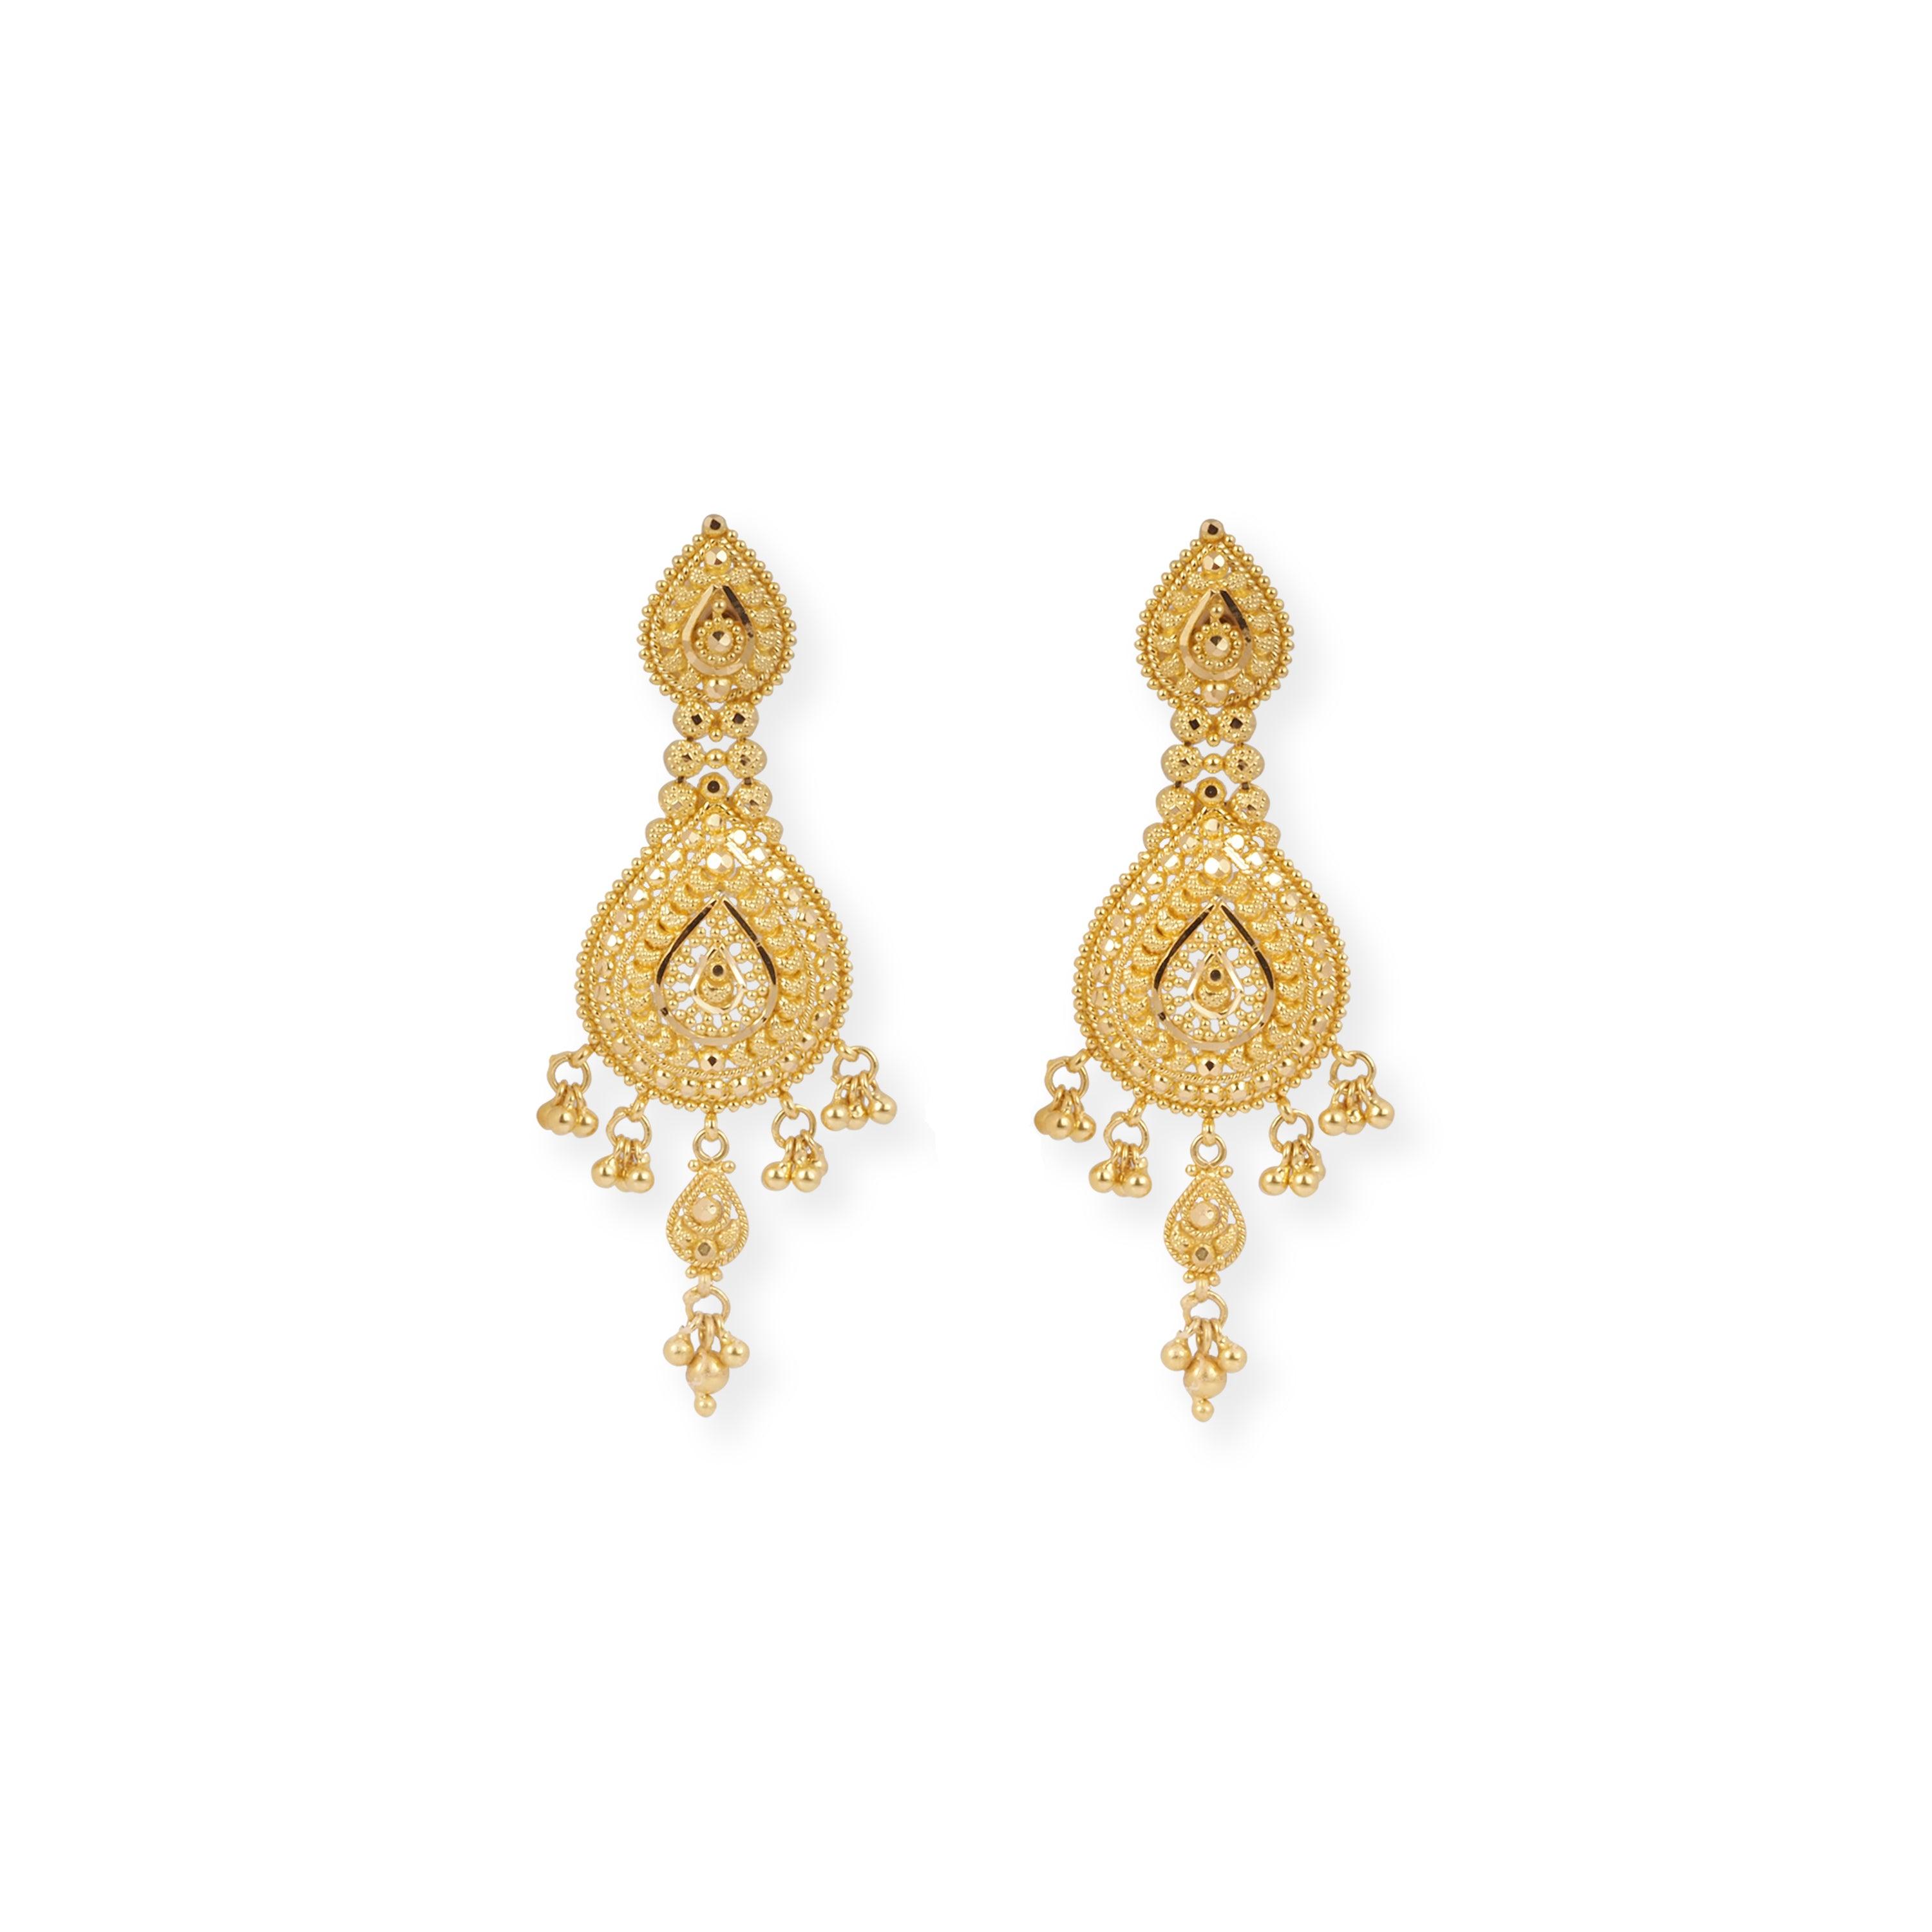 22ct Gold Filigree Design Necklace and Earrings Set - 8603 - Minar Jewellers